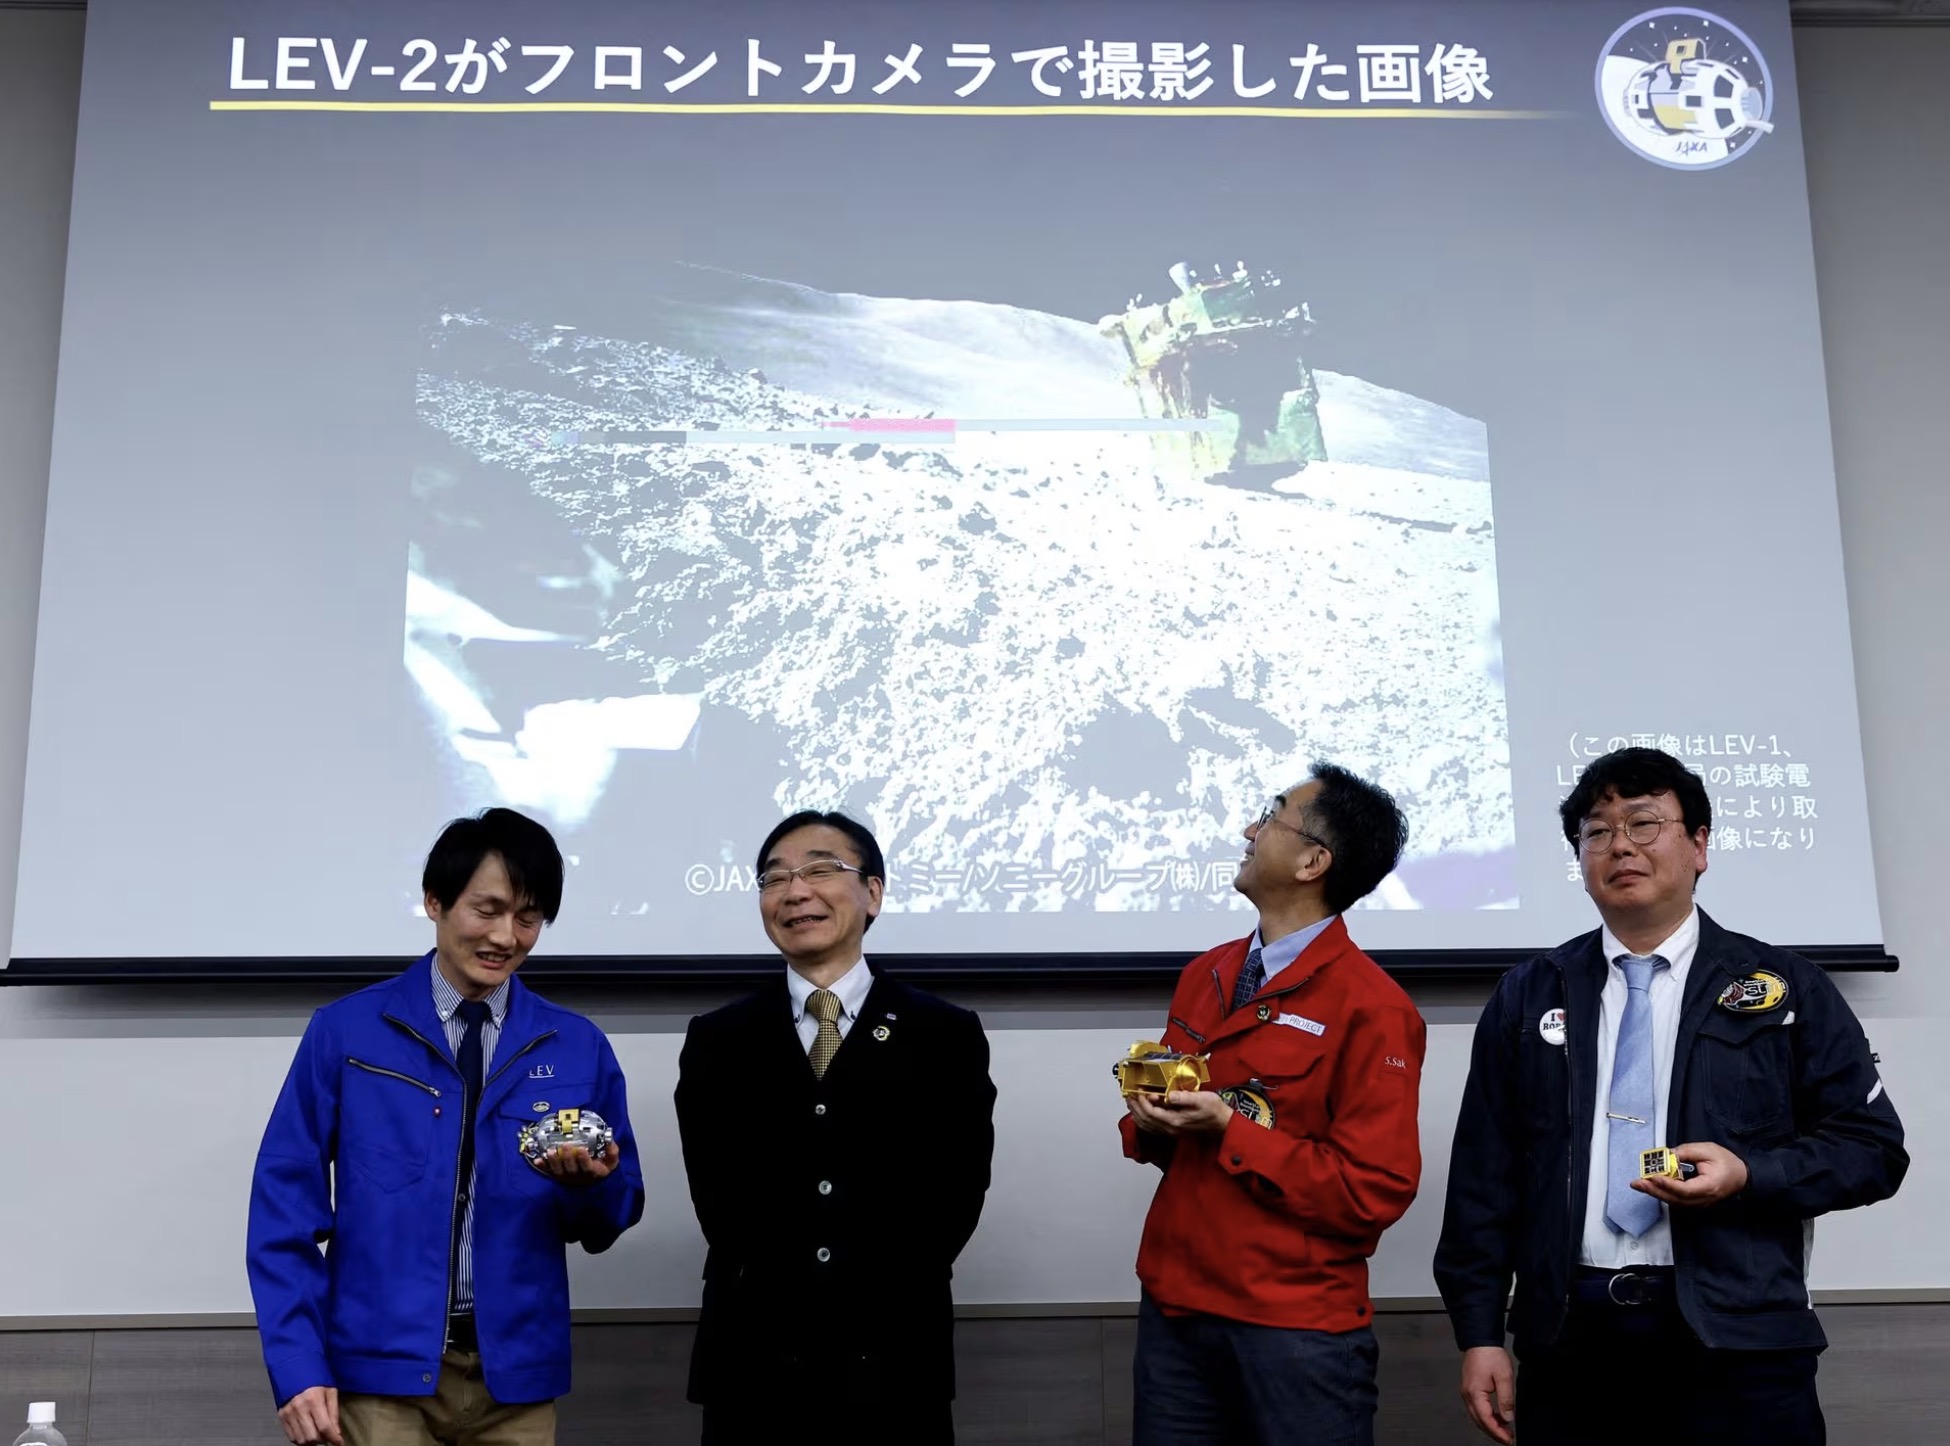 L to R: Daichi Hirano, Hitoshi Kuninaka, Shinichiro Sakai and Masatsugu Otsuki from the Japan Aerospace Exploration Agency, smile in front of a screen showing an image taken by LEV-2 on the moon, after their press conference on SLIM's moon landing mission, in Tokyo, Japan, January 25, 2024. /Reuters